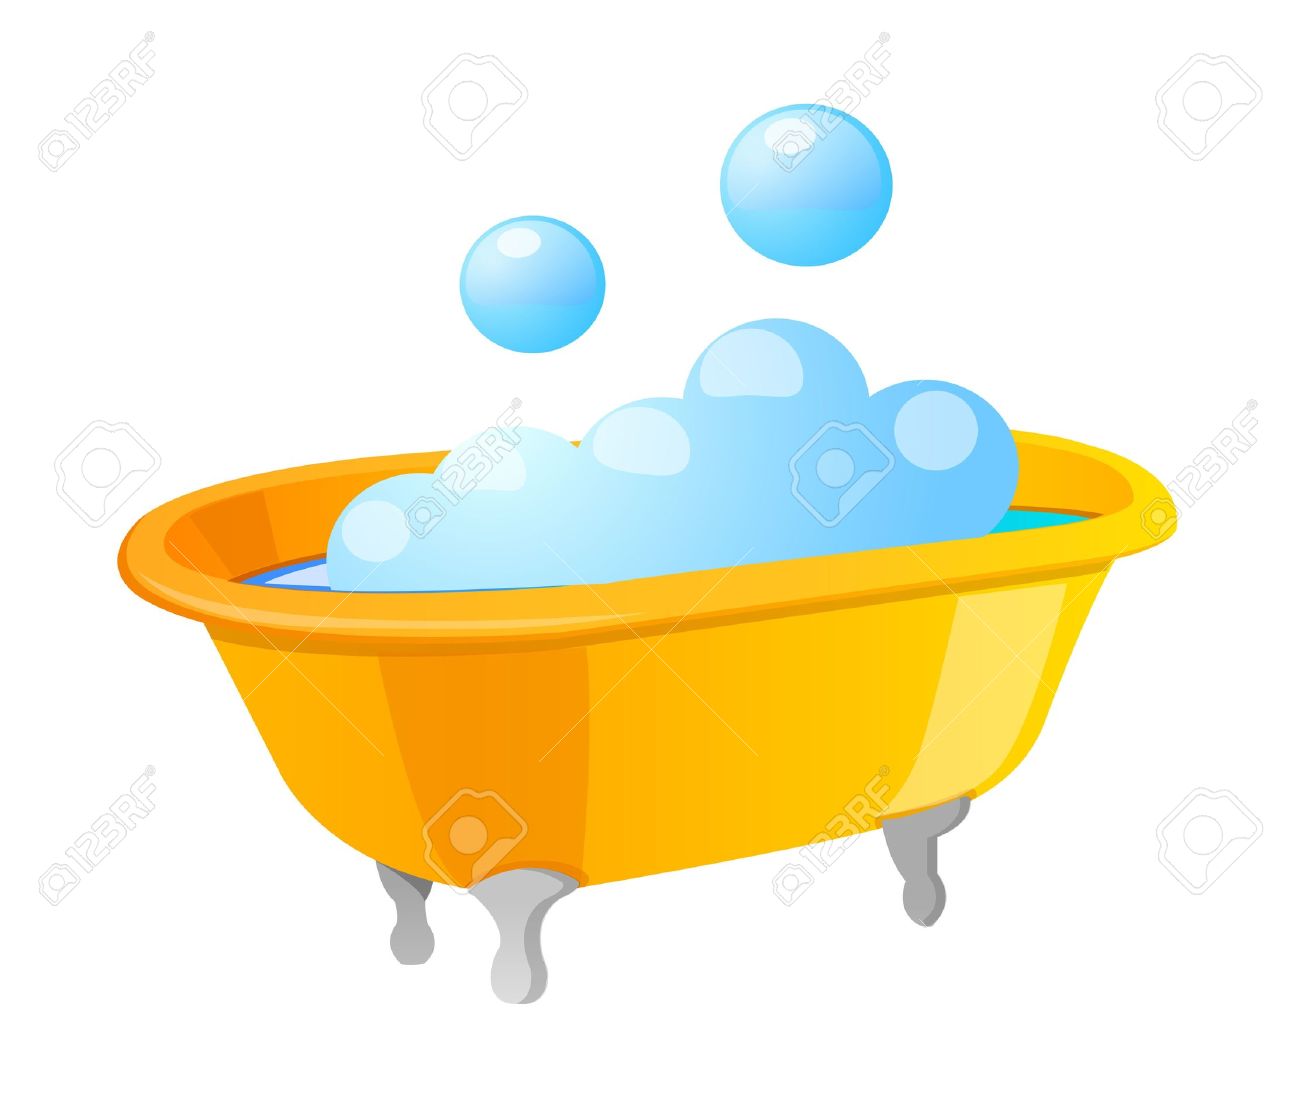 Bubble Bath Clipart | Free download on ClipArtMag